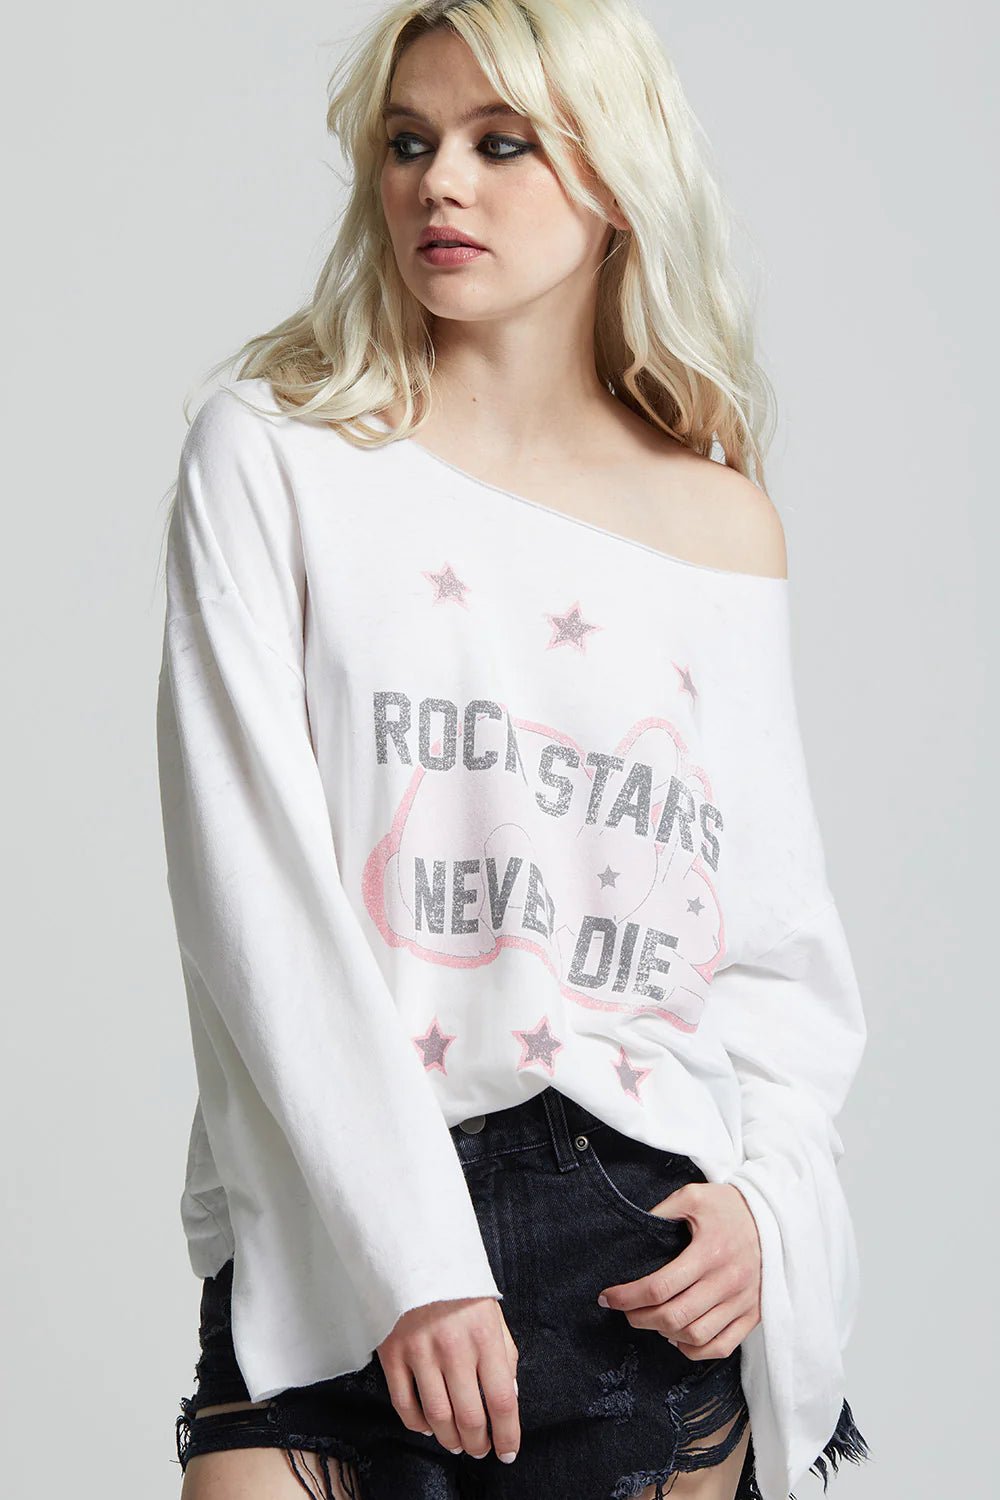 Rock Stars Never Die Bell Sleeve - Something about Sofia